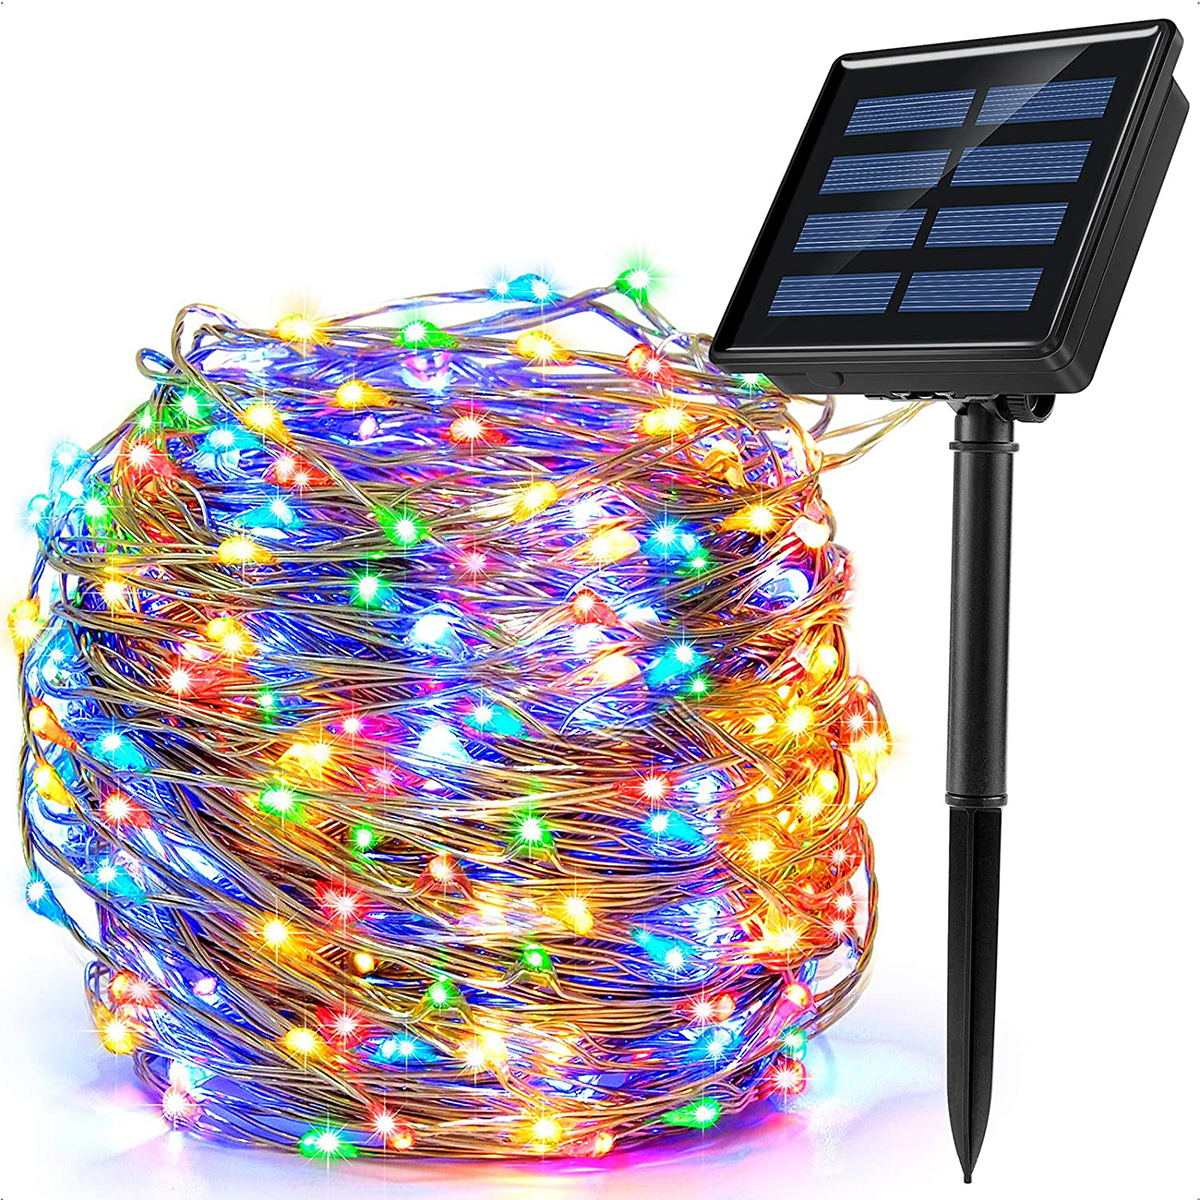 LED Solar String Lights Rope Light Strip Fairy Lights Outdoor Waterproof 8 Modes Garden Xmas Party Lam Decorative Lighting for Patio Garden Yard Party Wedding - image 1 of 9